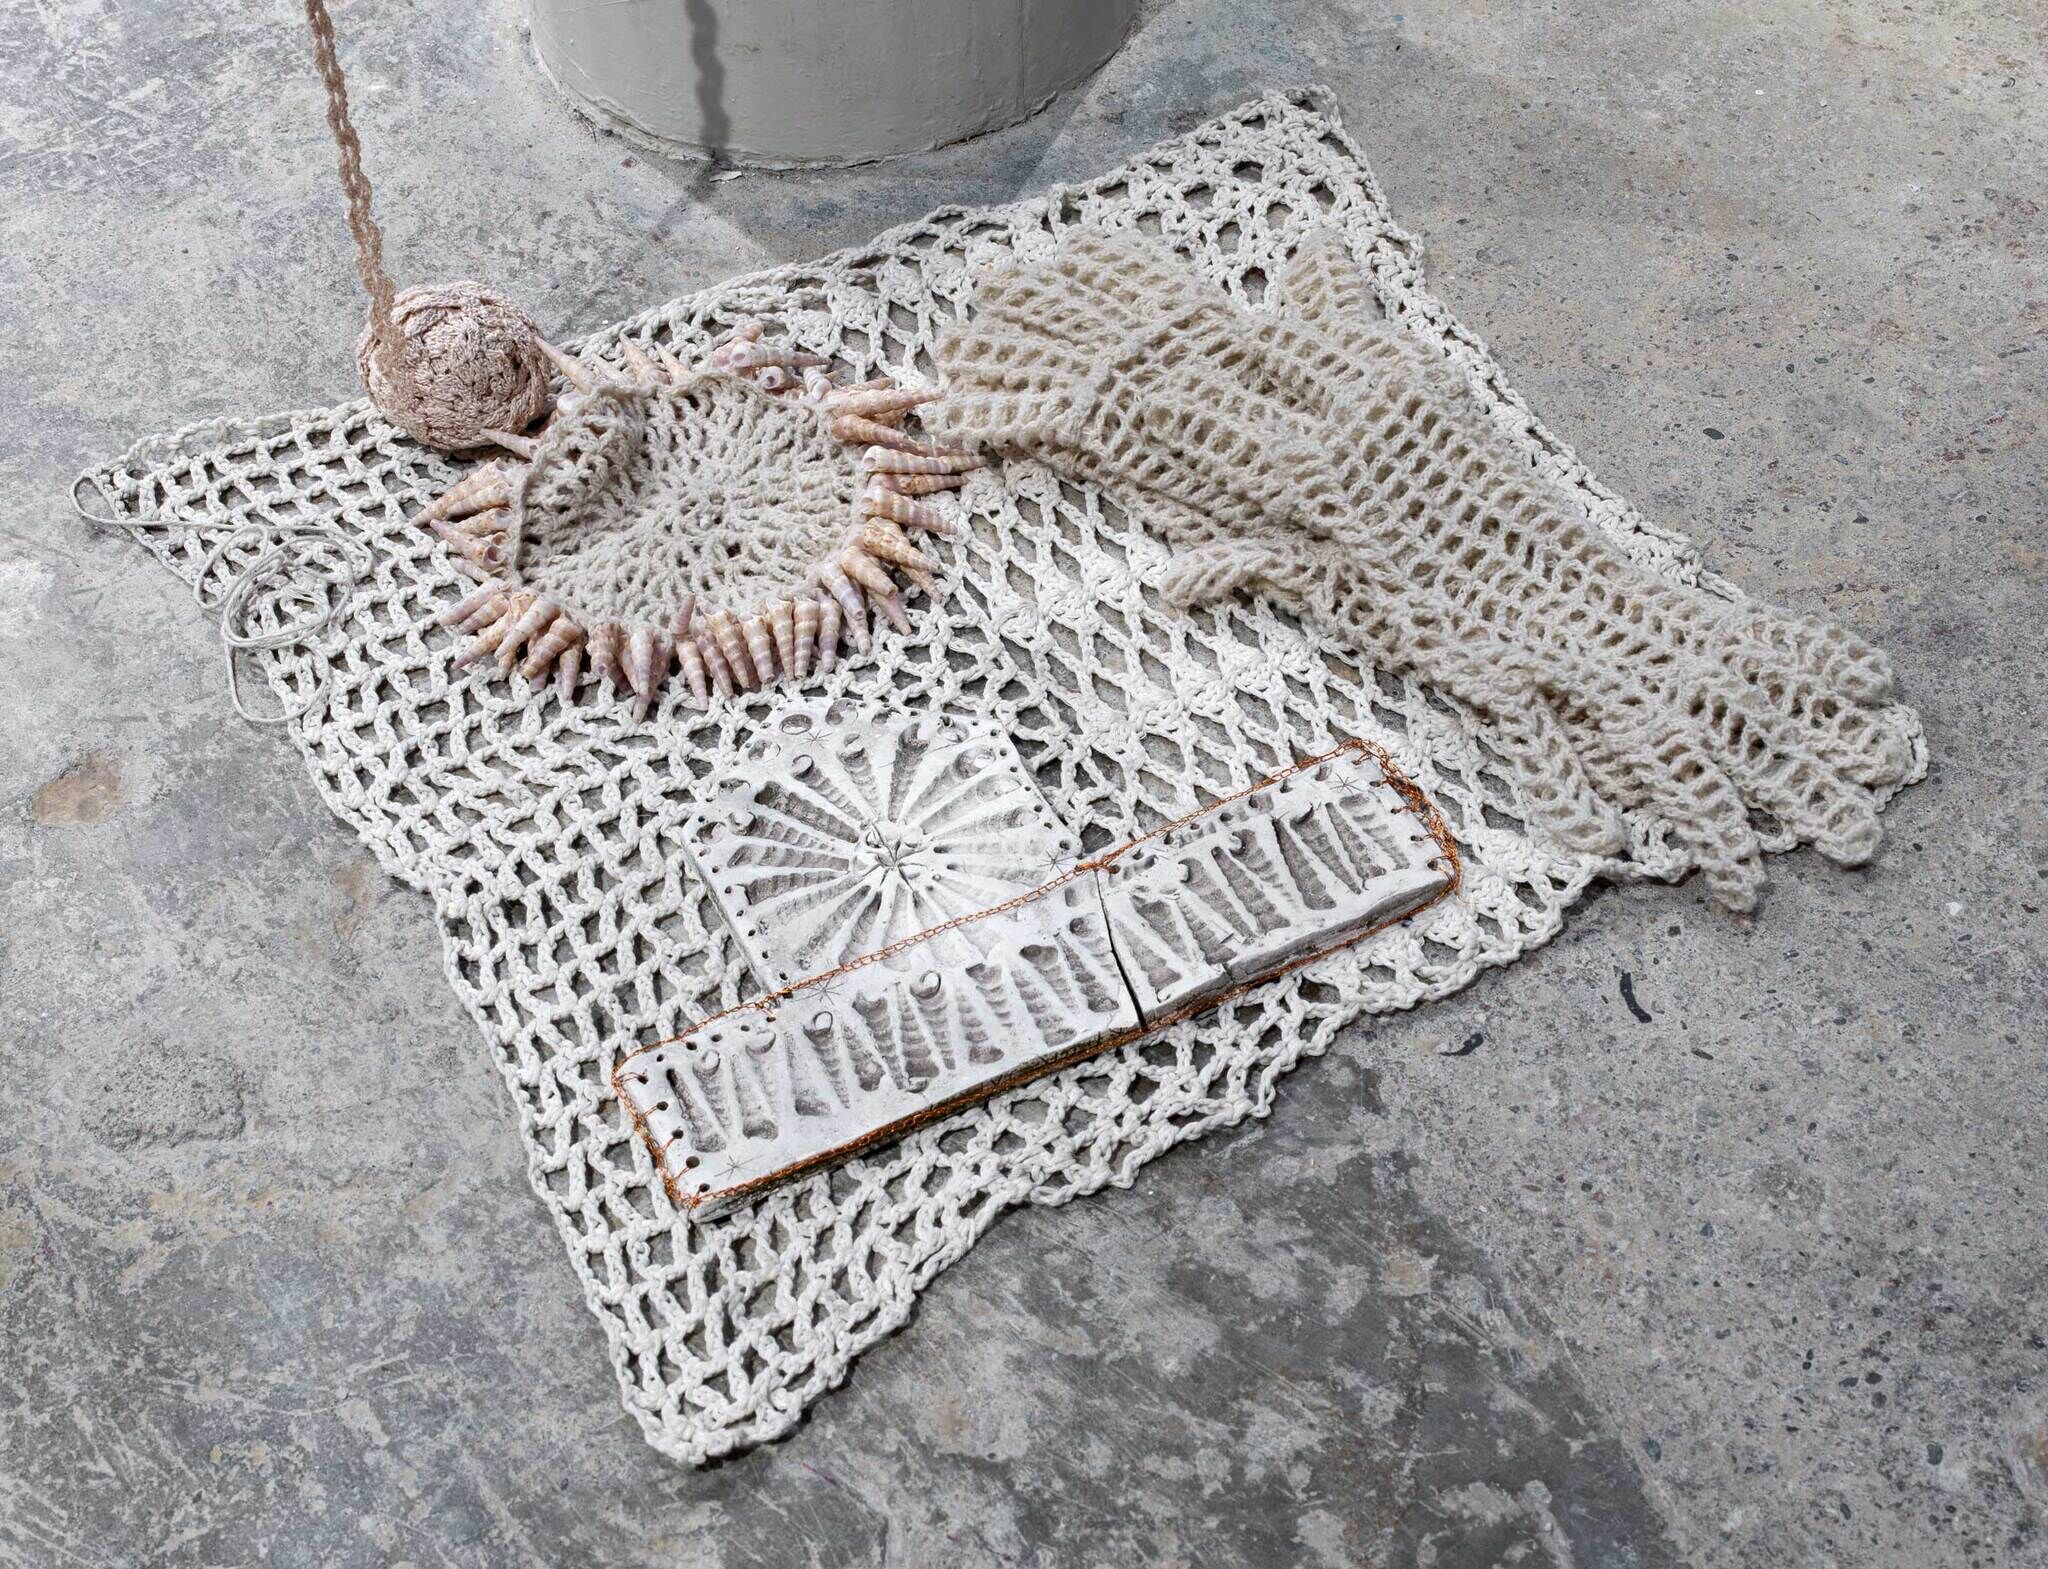 A crocheted textile artwork resembling a human figure with a stone, netted gloves, on a concrete floor.